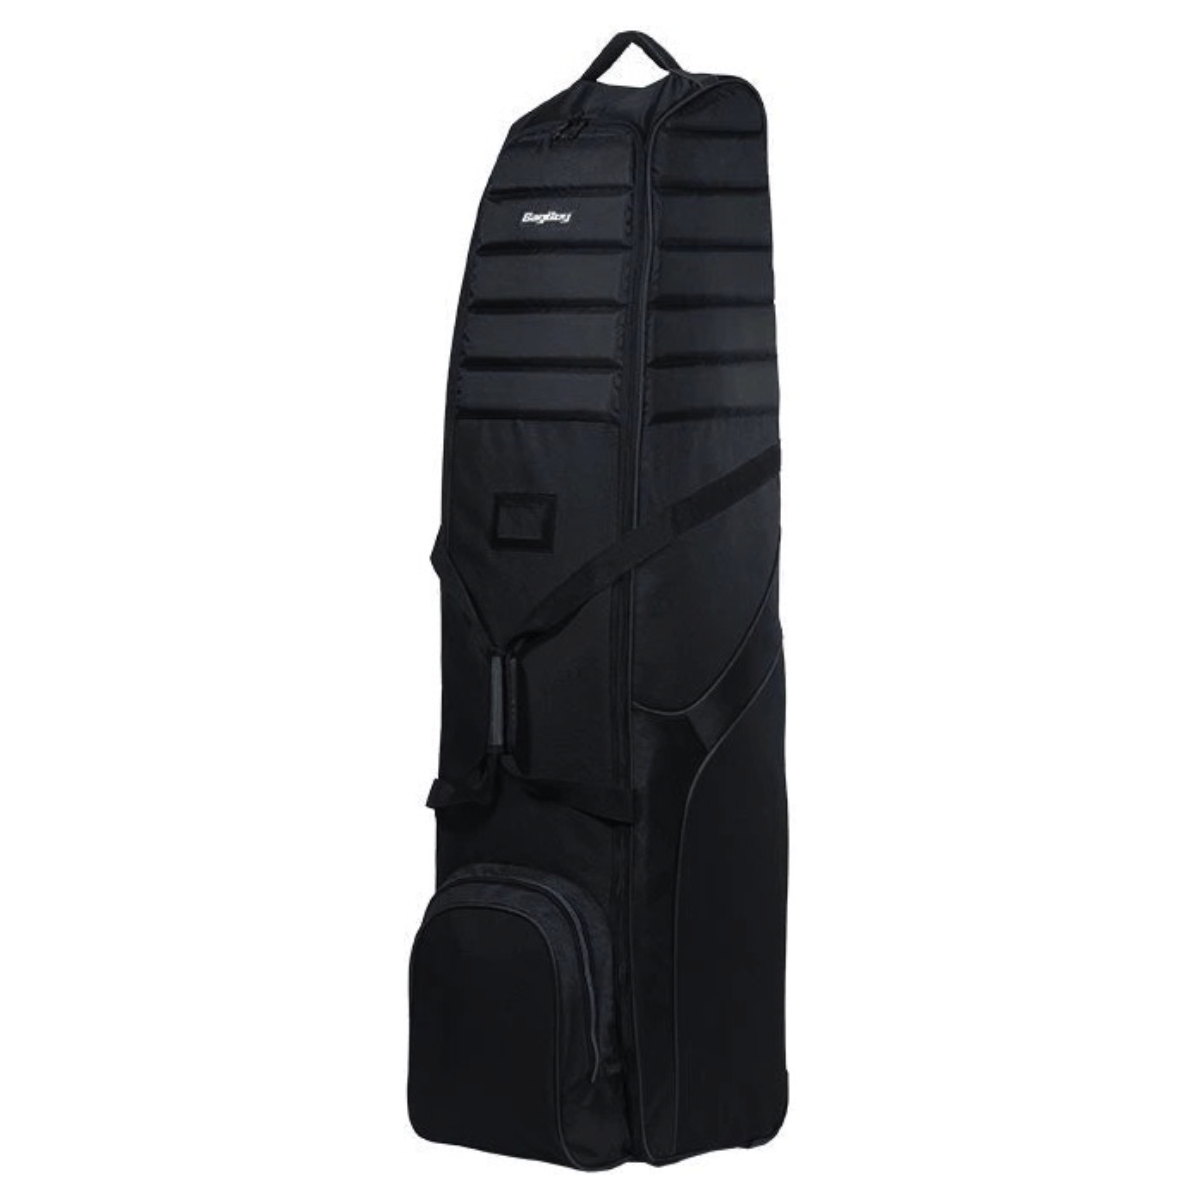 Bag Boy T660 Black/Charcoal Travelcover